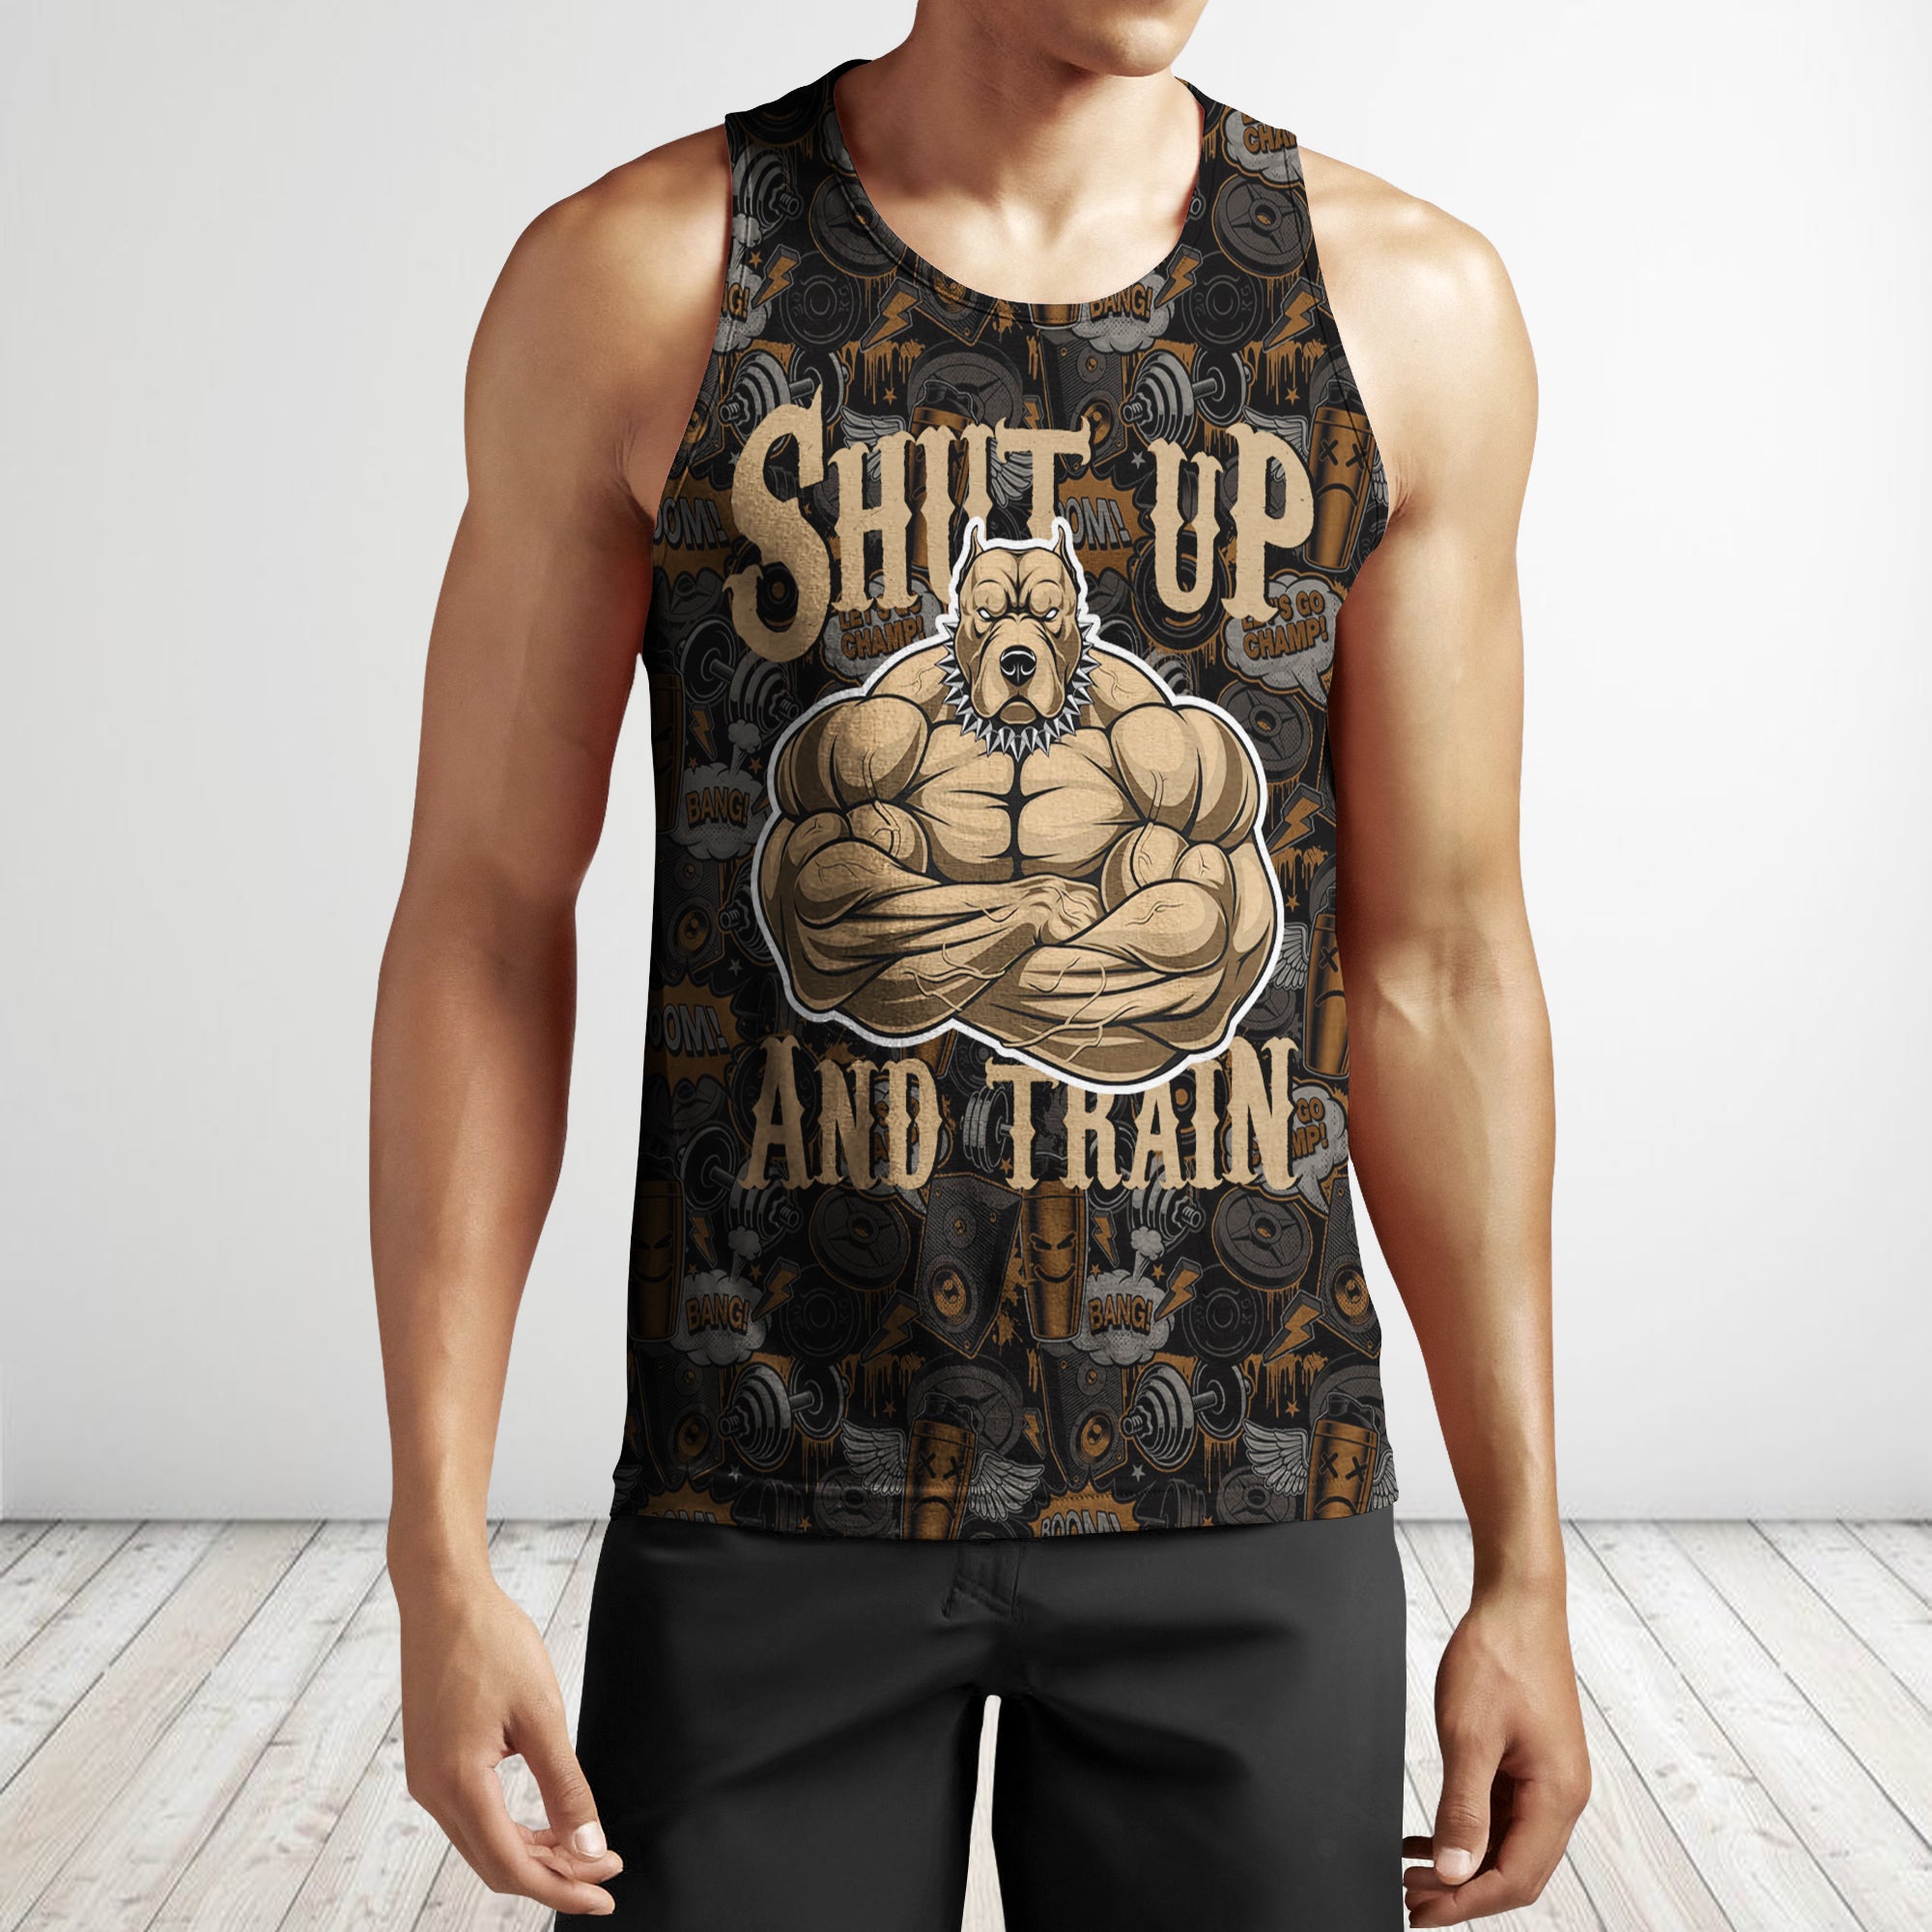 Personalised Men Gym Tank Tops Motivational Shirts Muscle Strong Pitbull Shut up and Train